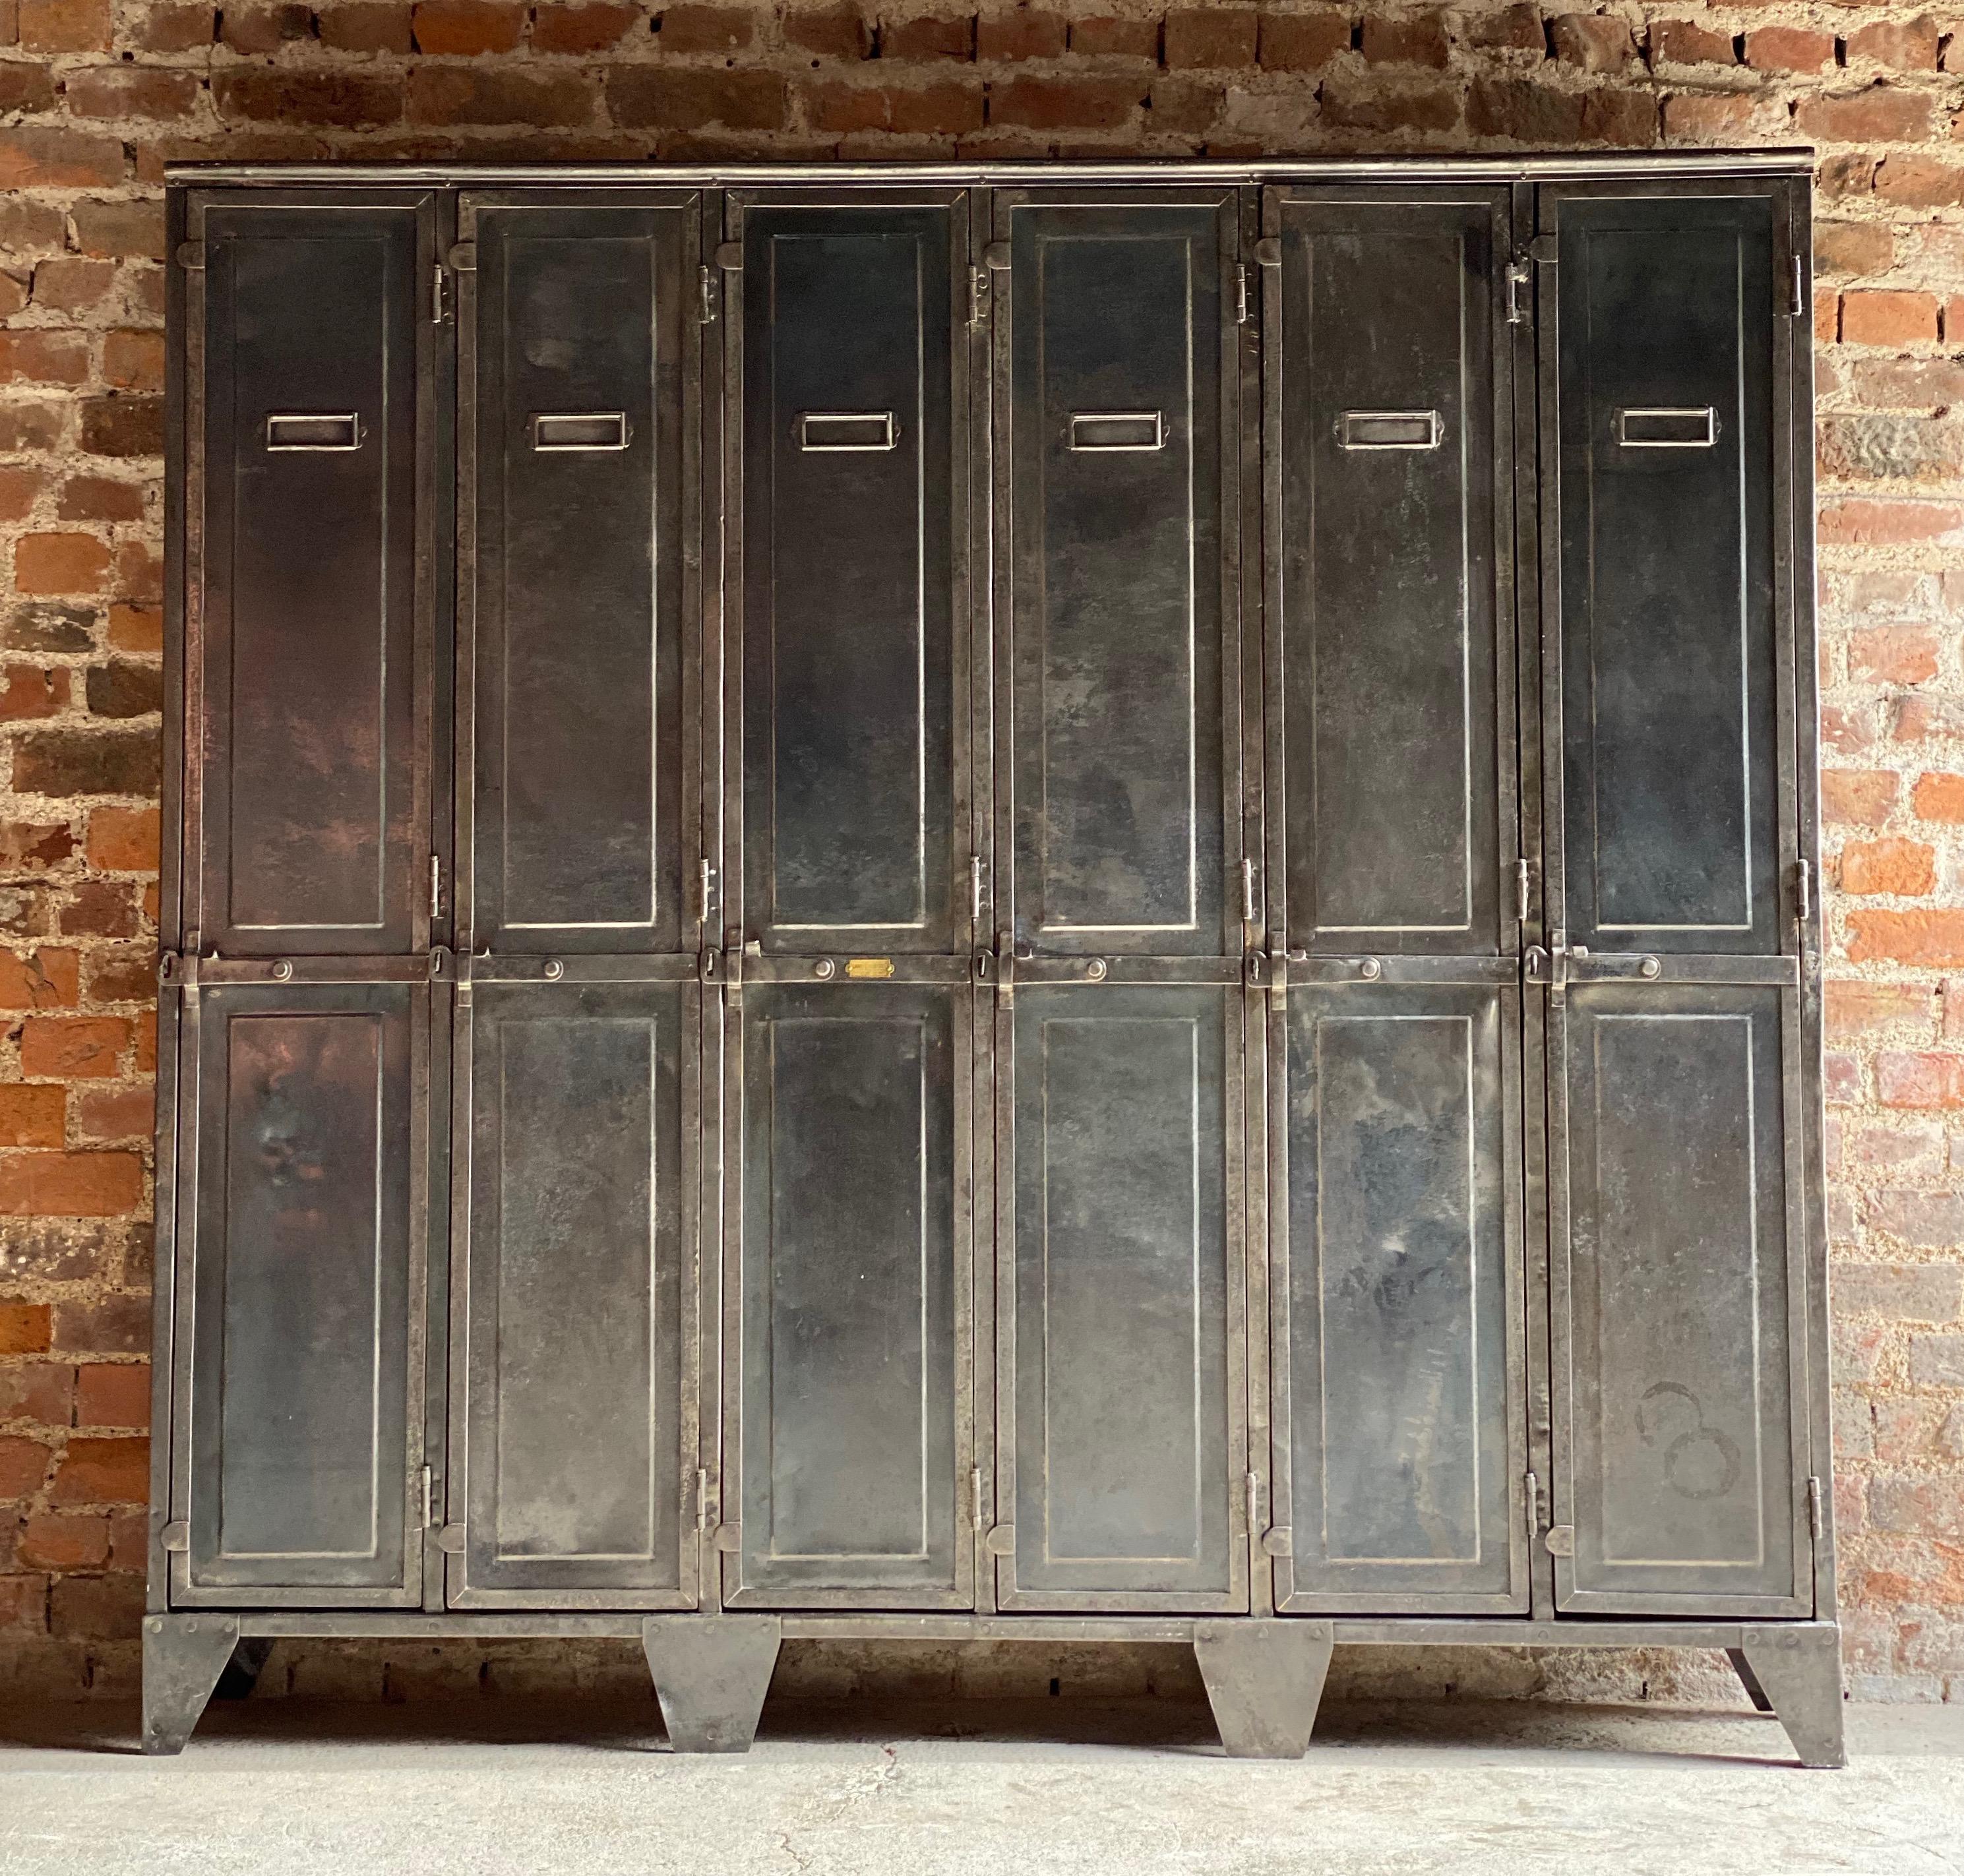 Antique French steel school lockers Laugel & Renouard St Die Vosges, circa 1890

Exceptional antique French steel school lockers by Laugel & Renouard St Die Vosges France, circa 1890, The bank of six door lockers, each door with closing latch and